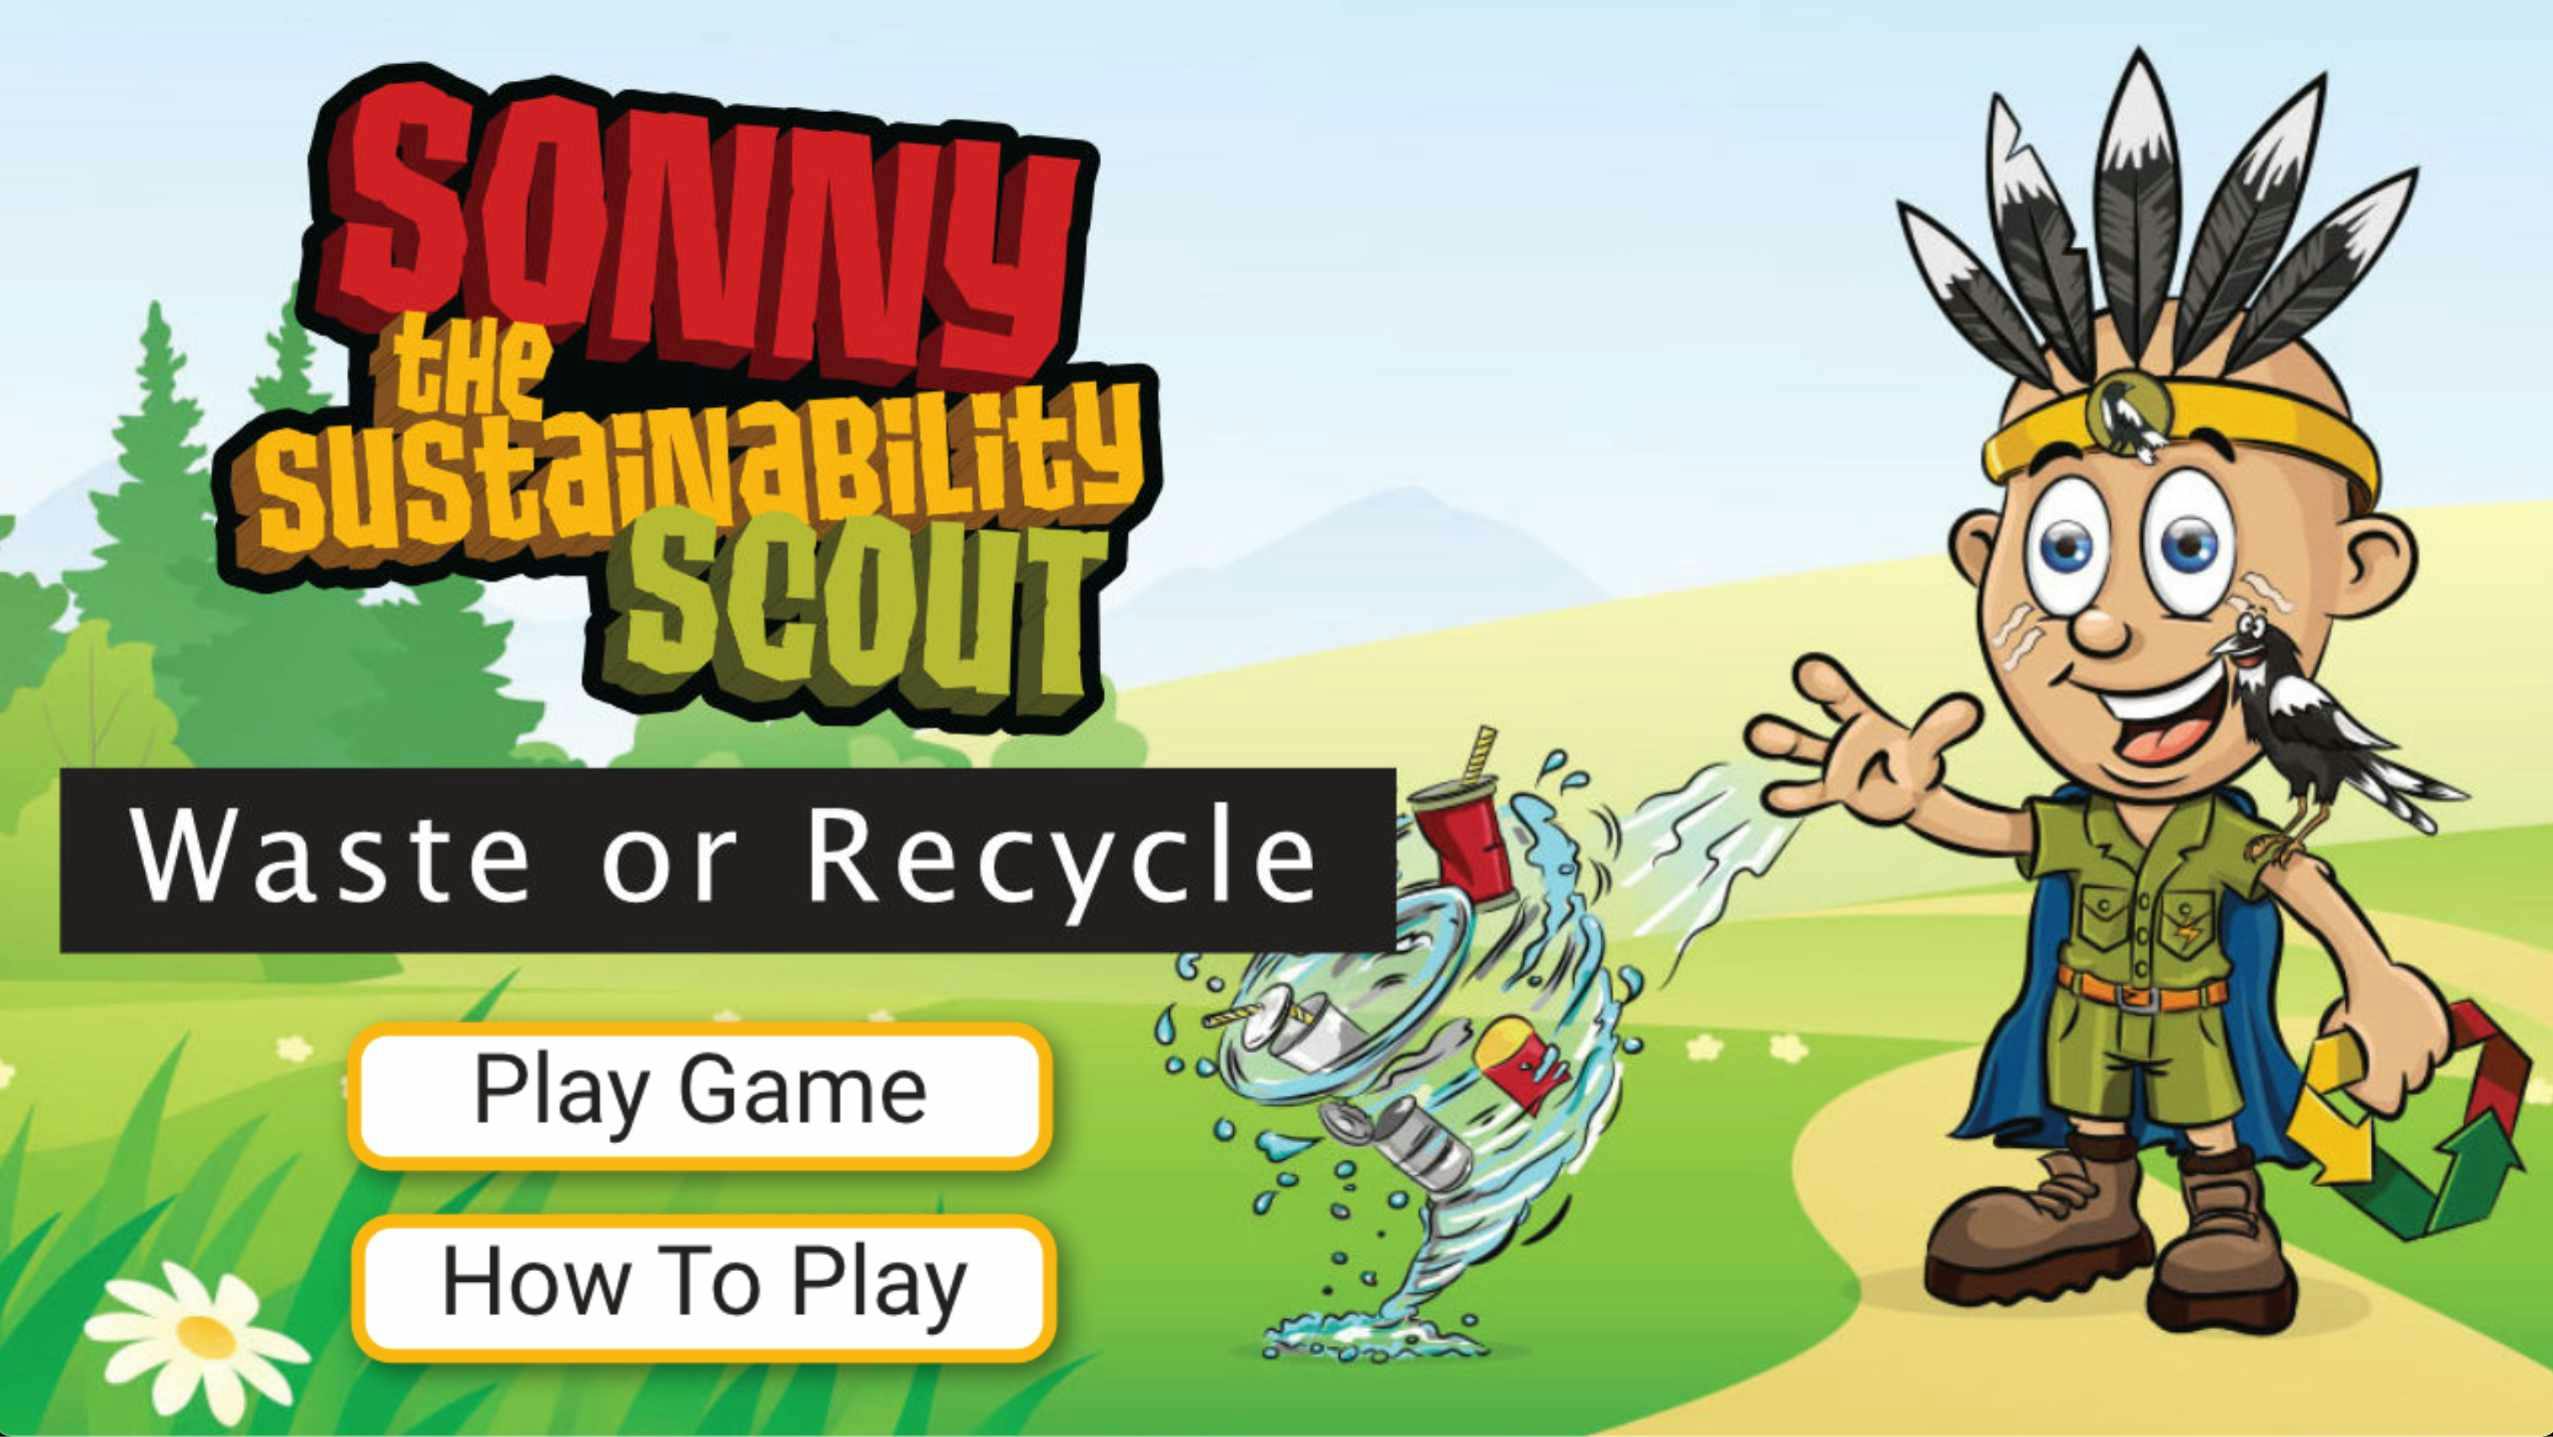 Sonny The Sustainability Scout - Waste and Recycle